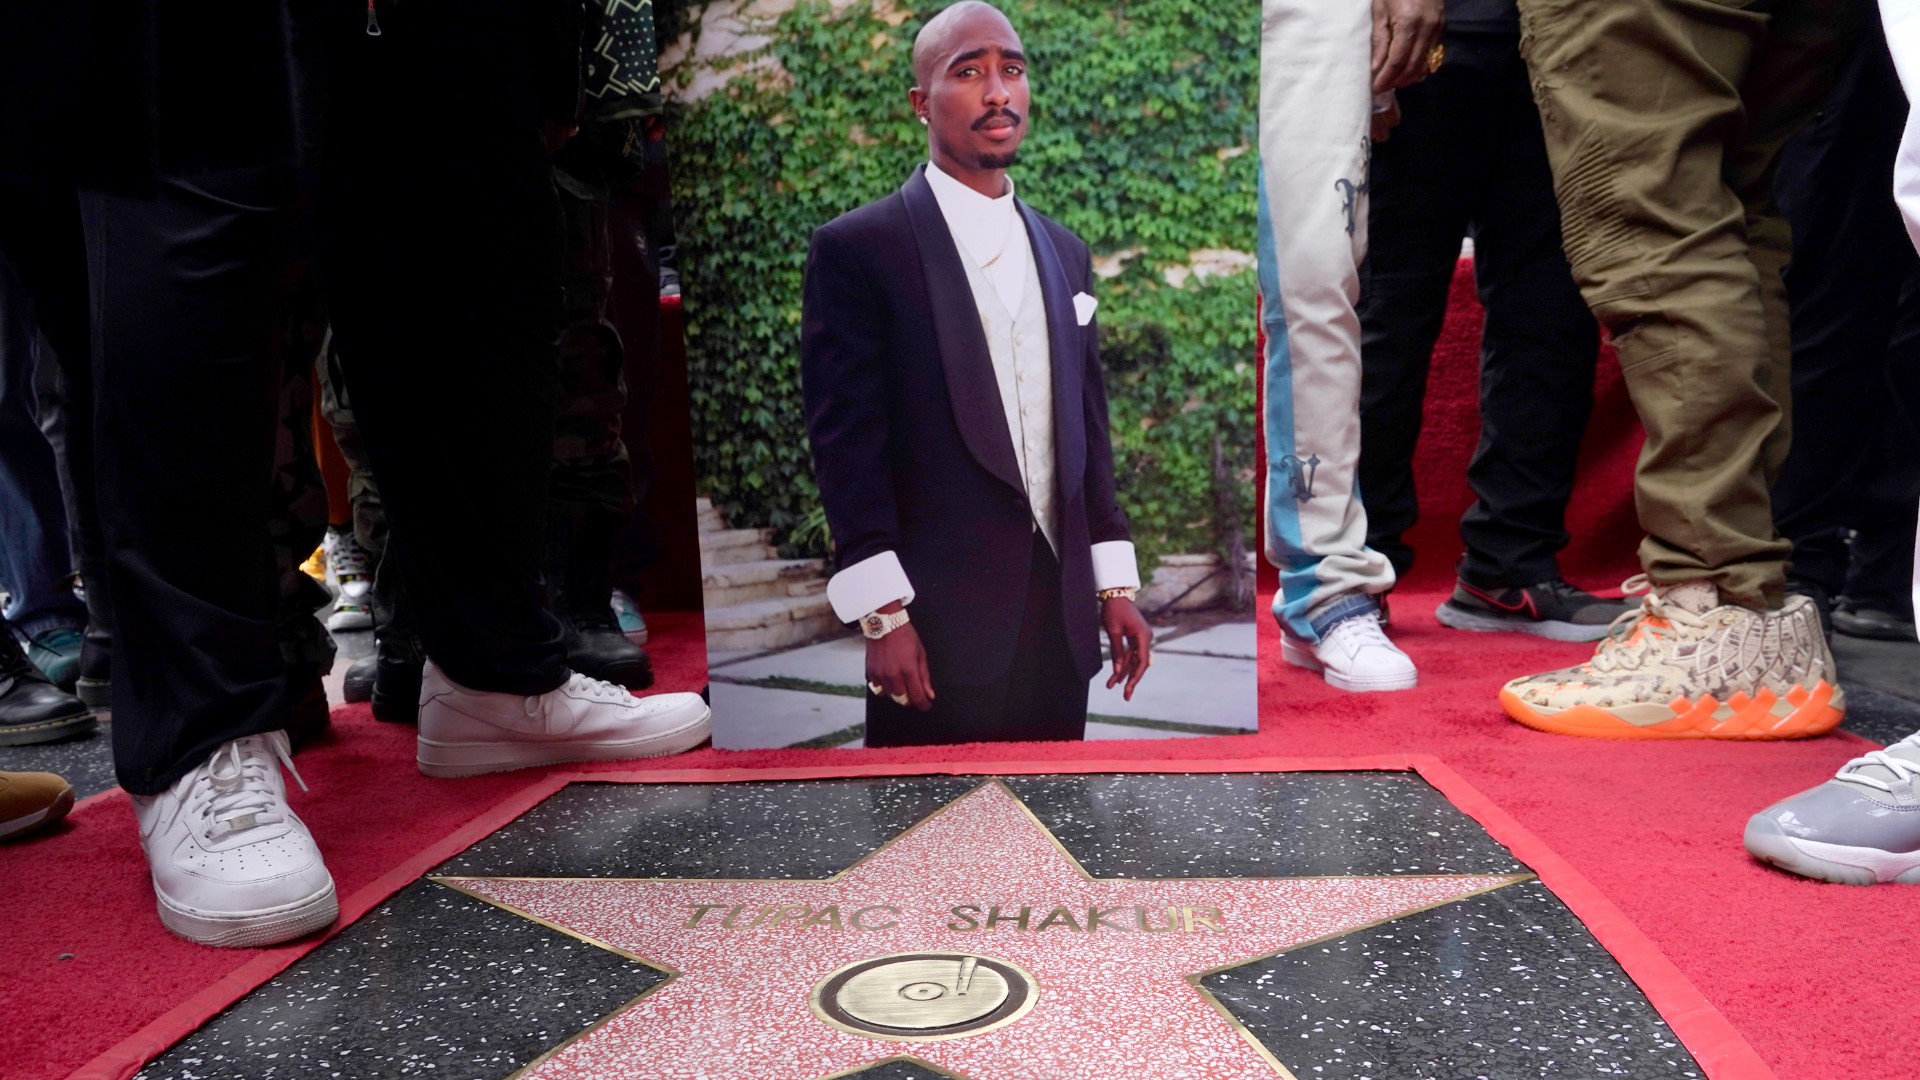 Tupac Shakur's sister accepted the star on behalf of their family and cried describing her older brother's vision of being celebrated with a star in Hollywood.